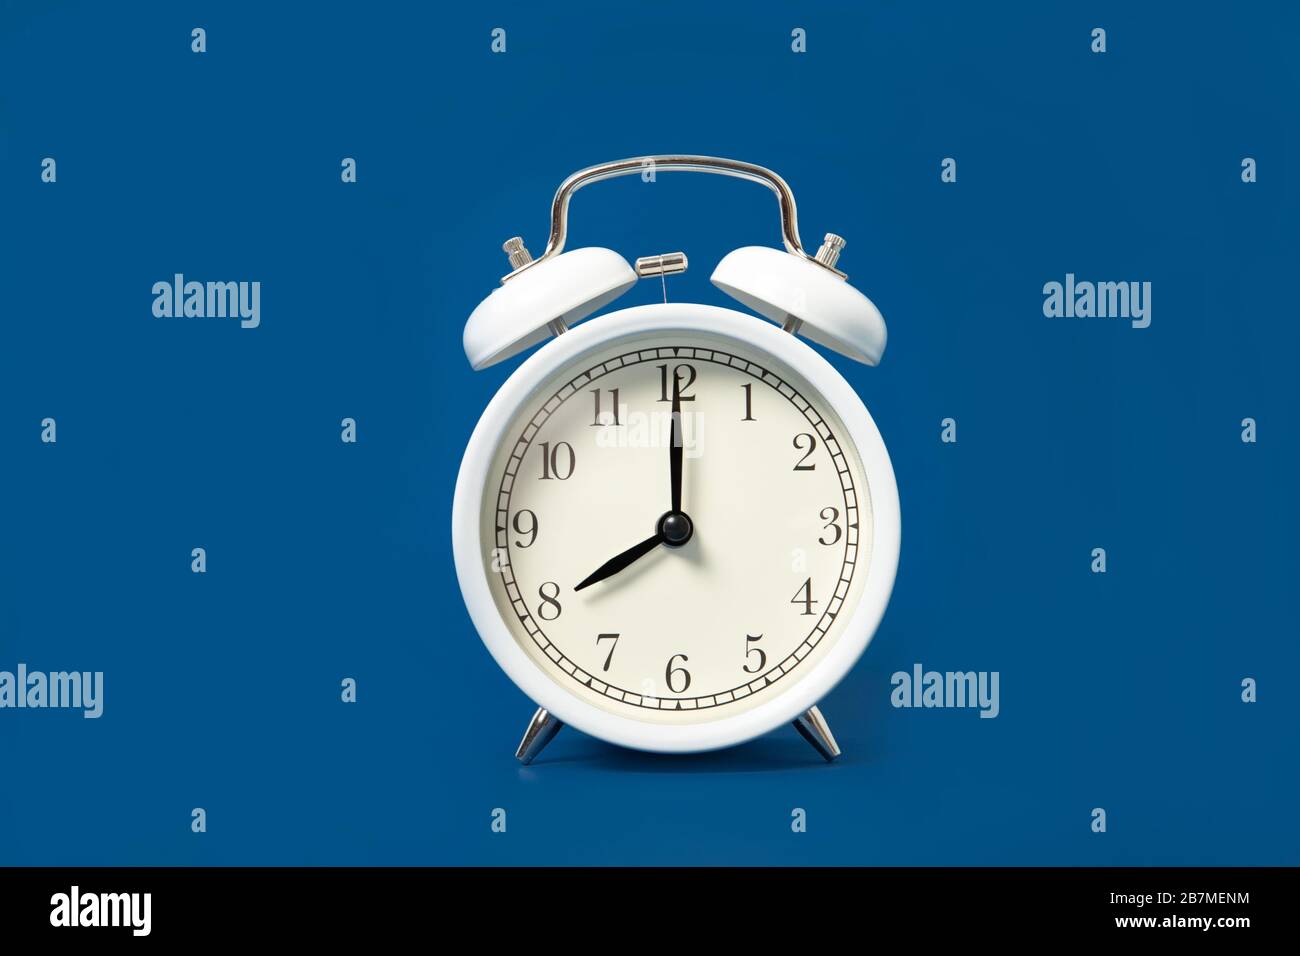 White alarm clock on a blue background. Place for text Stock Photo